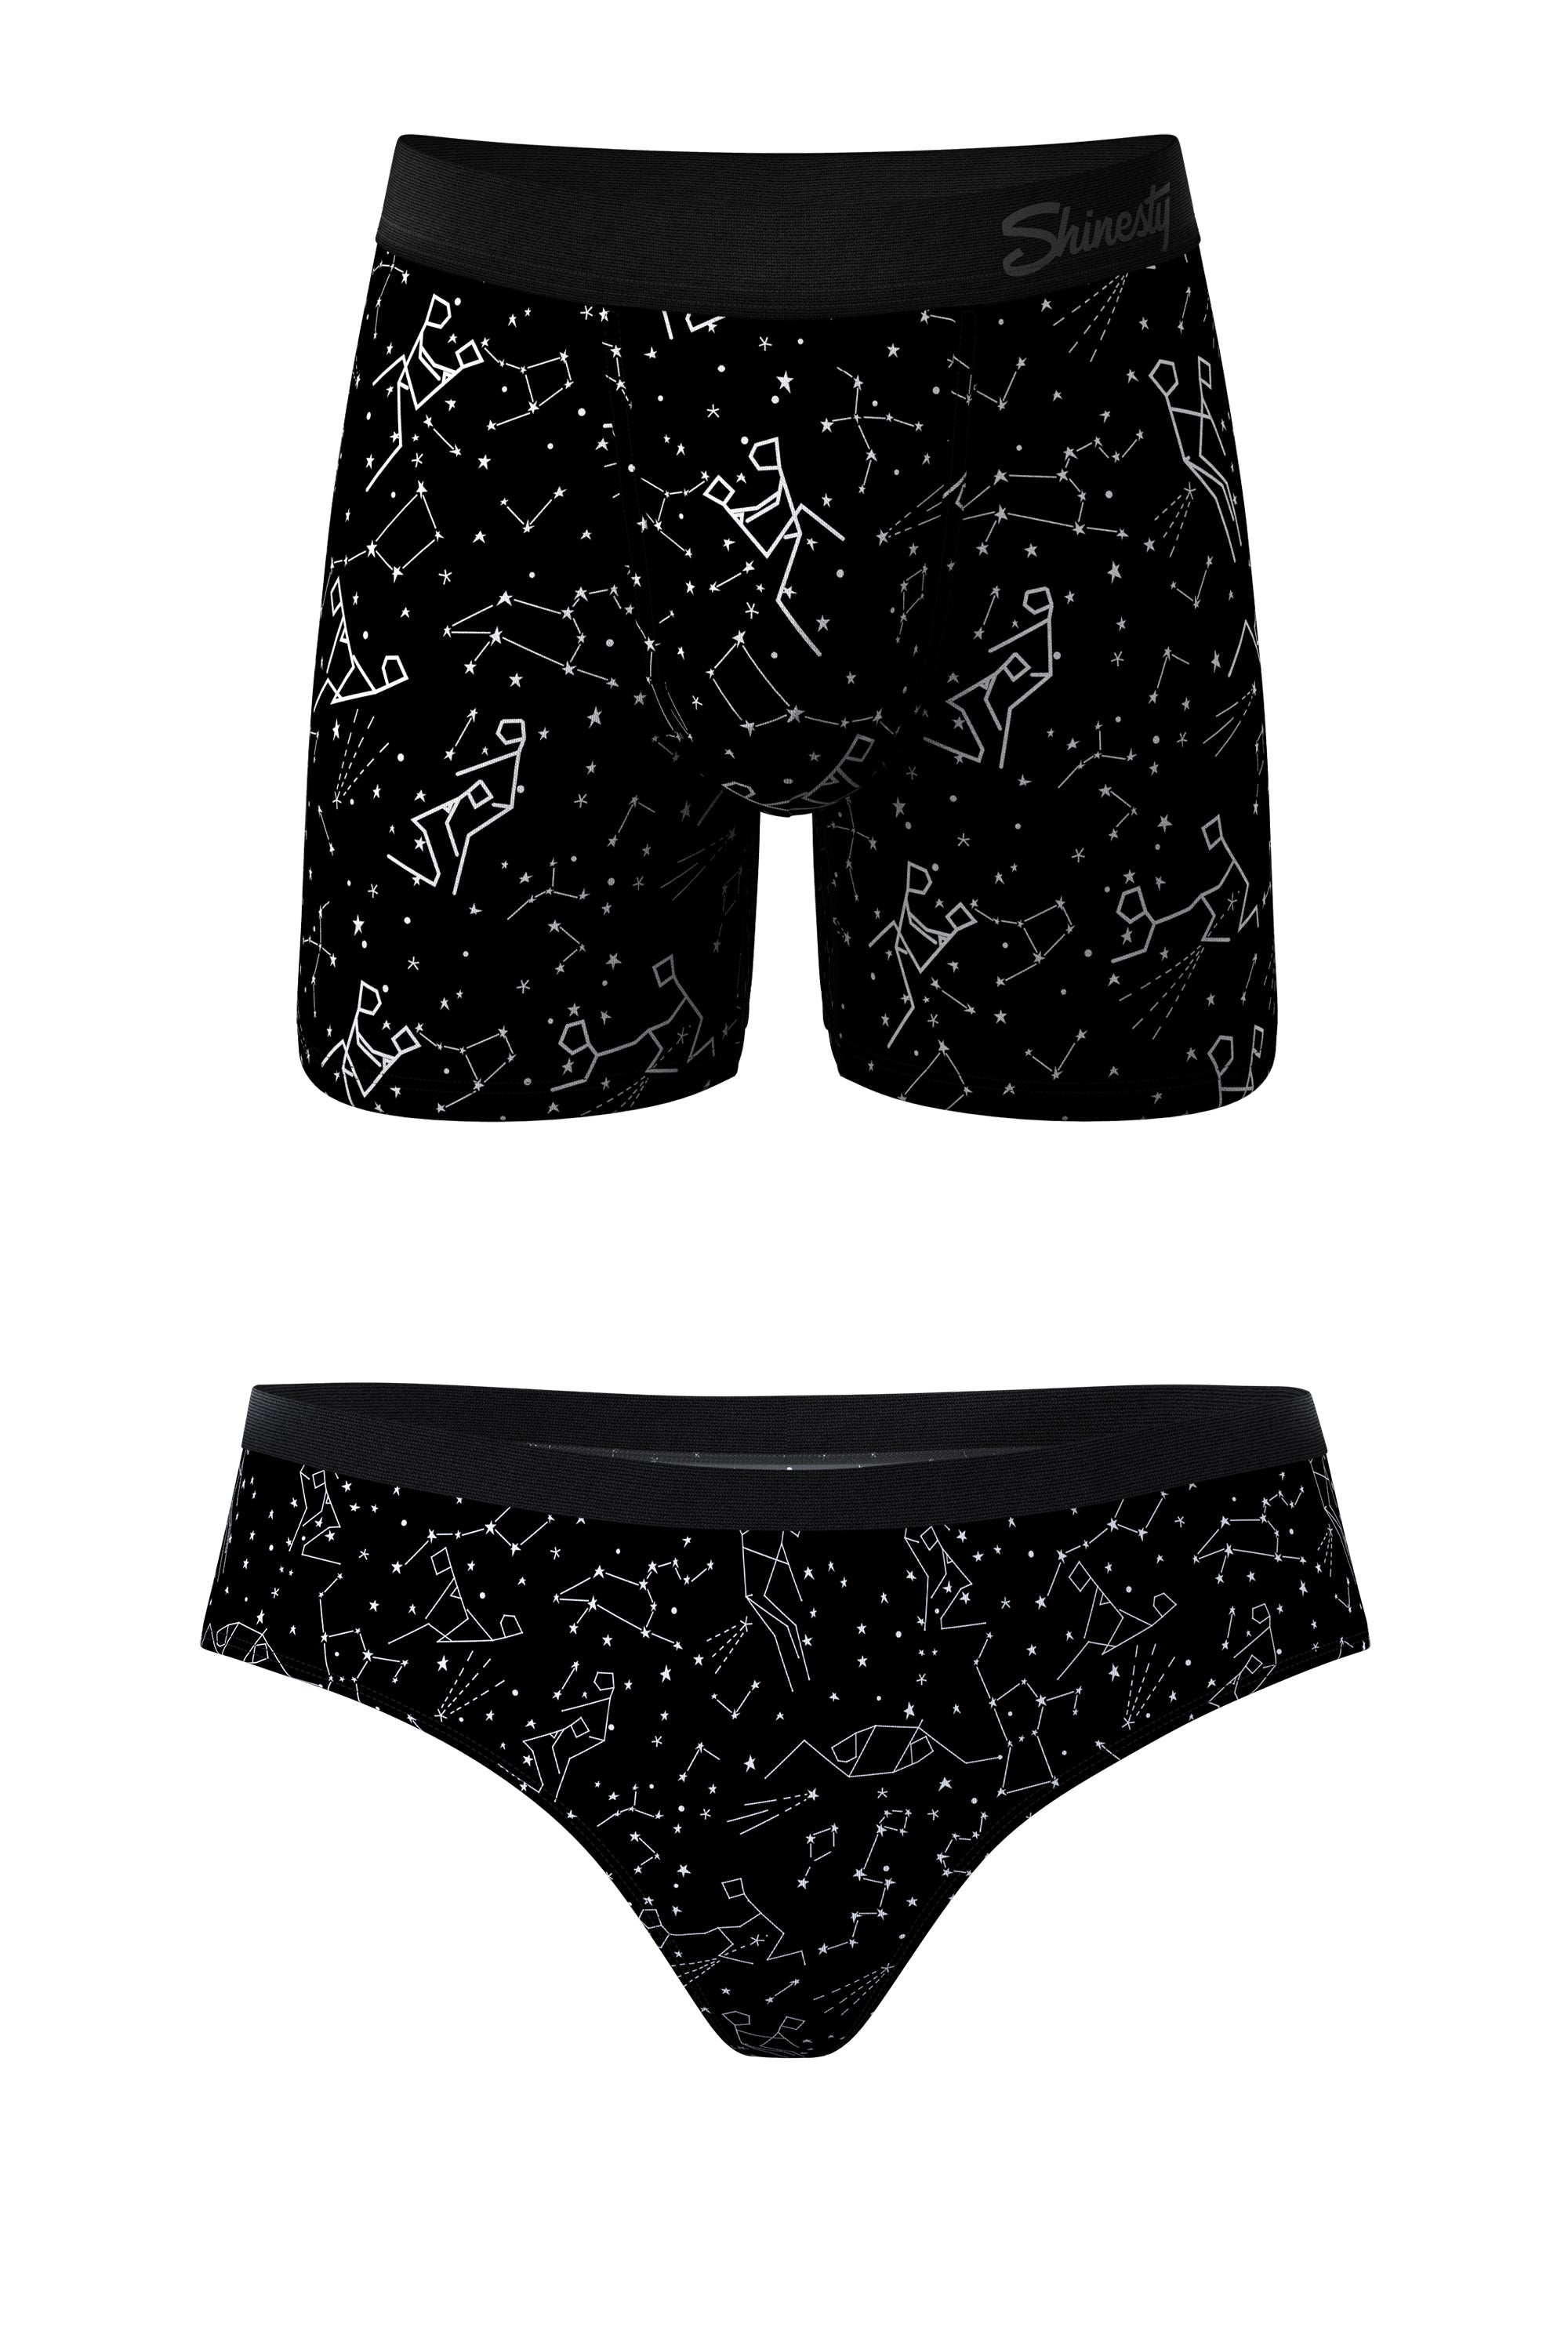 Hold Me & Guide Me Matching Sea Underwear Set - Youneek